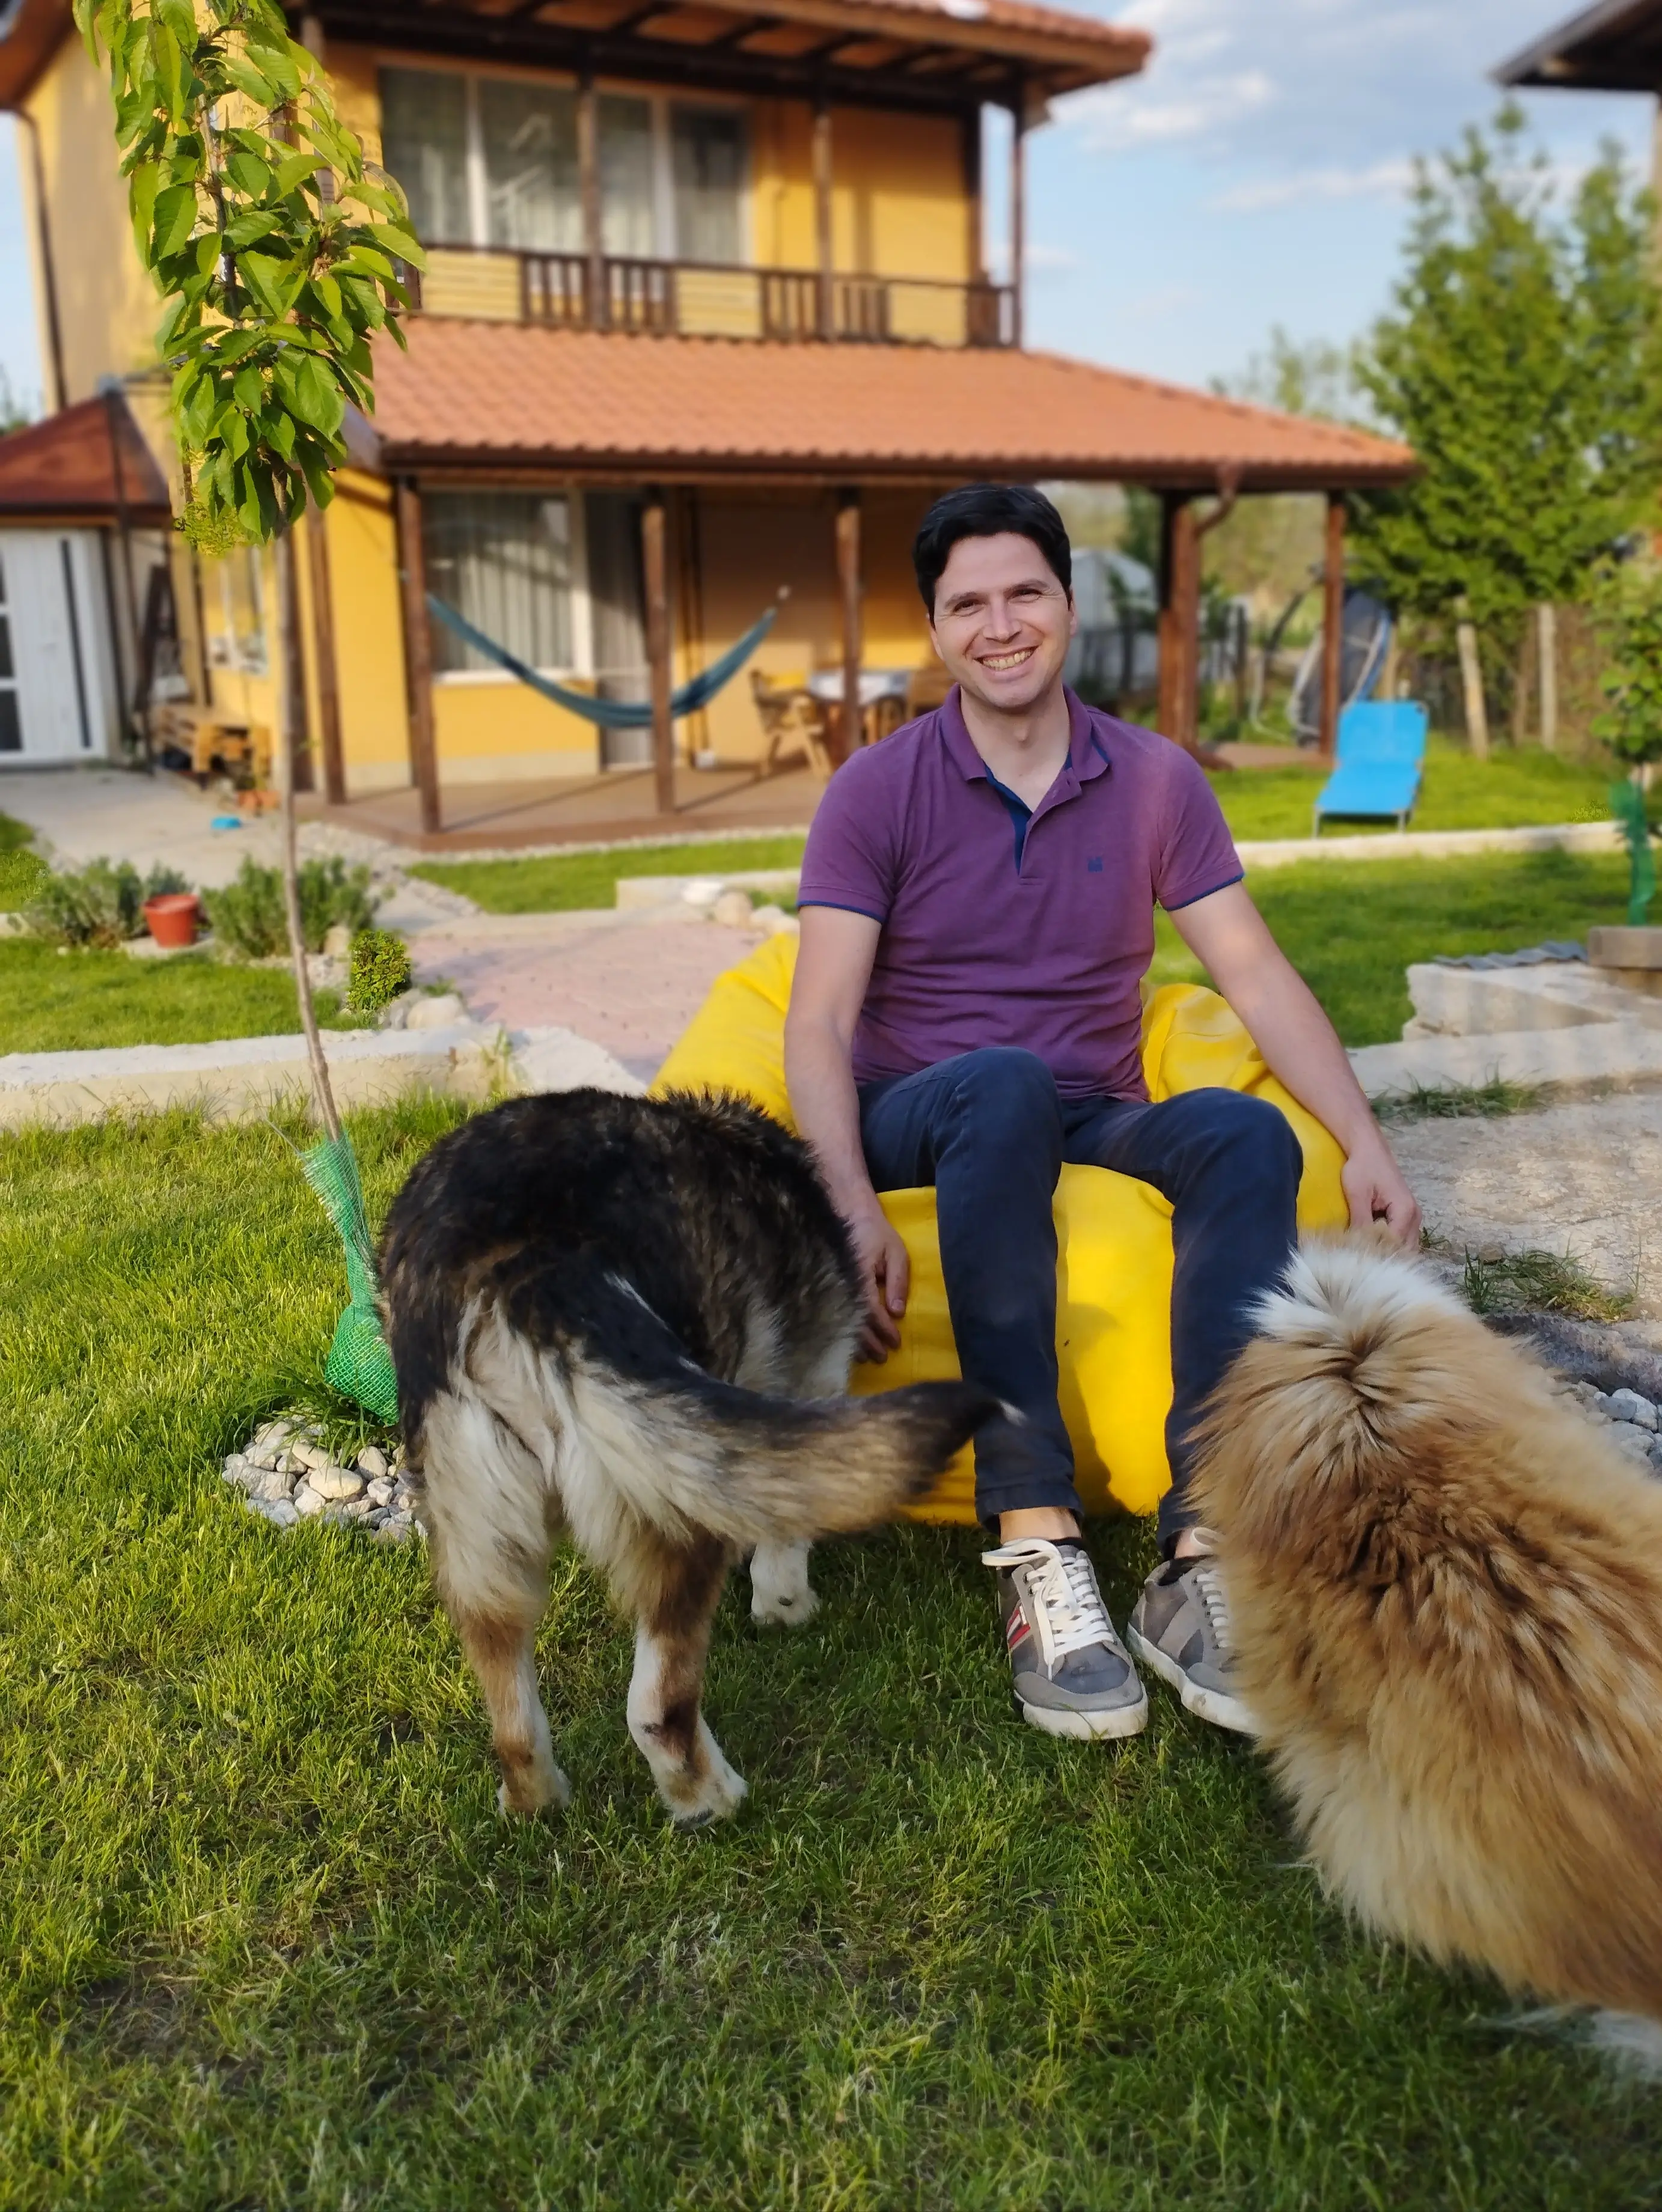 INDUSTRIA's Corda Team Lead, Nino Bonev, sitting outside his country home with his two adopted dogs, Maya and Chichi. Nino also has 7 cats.